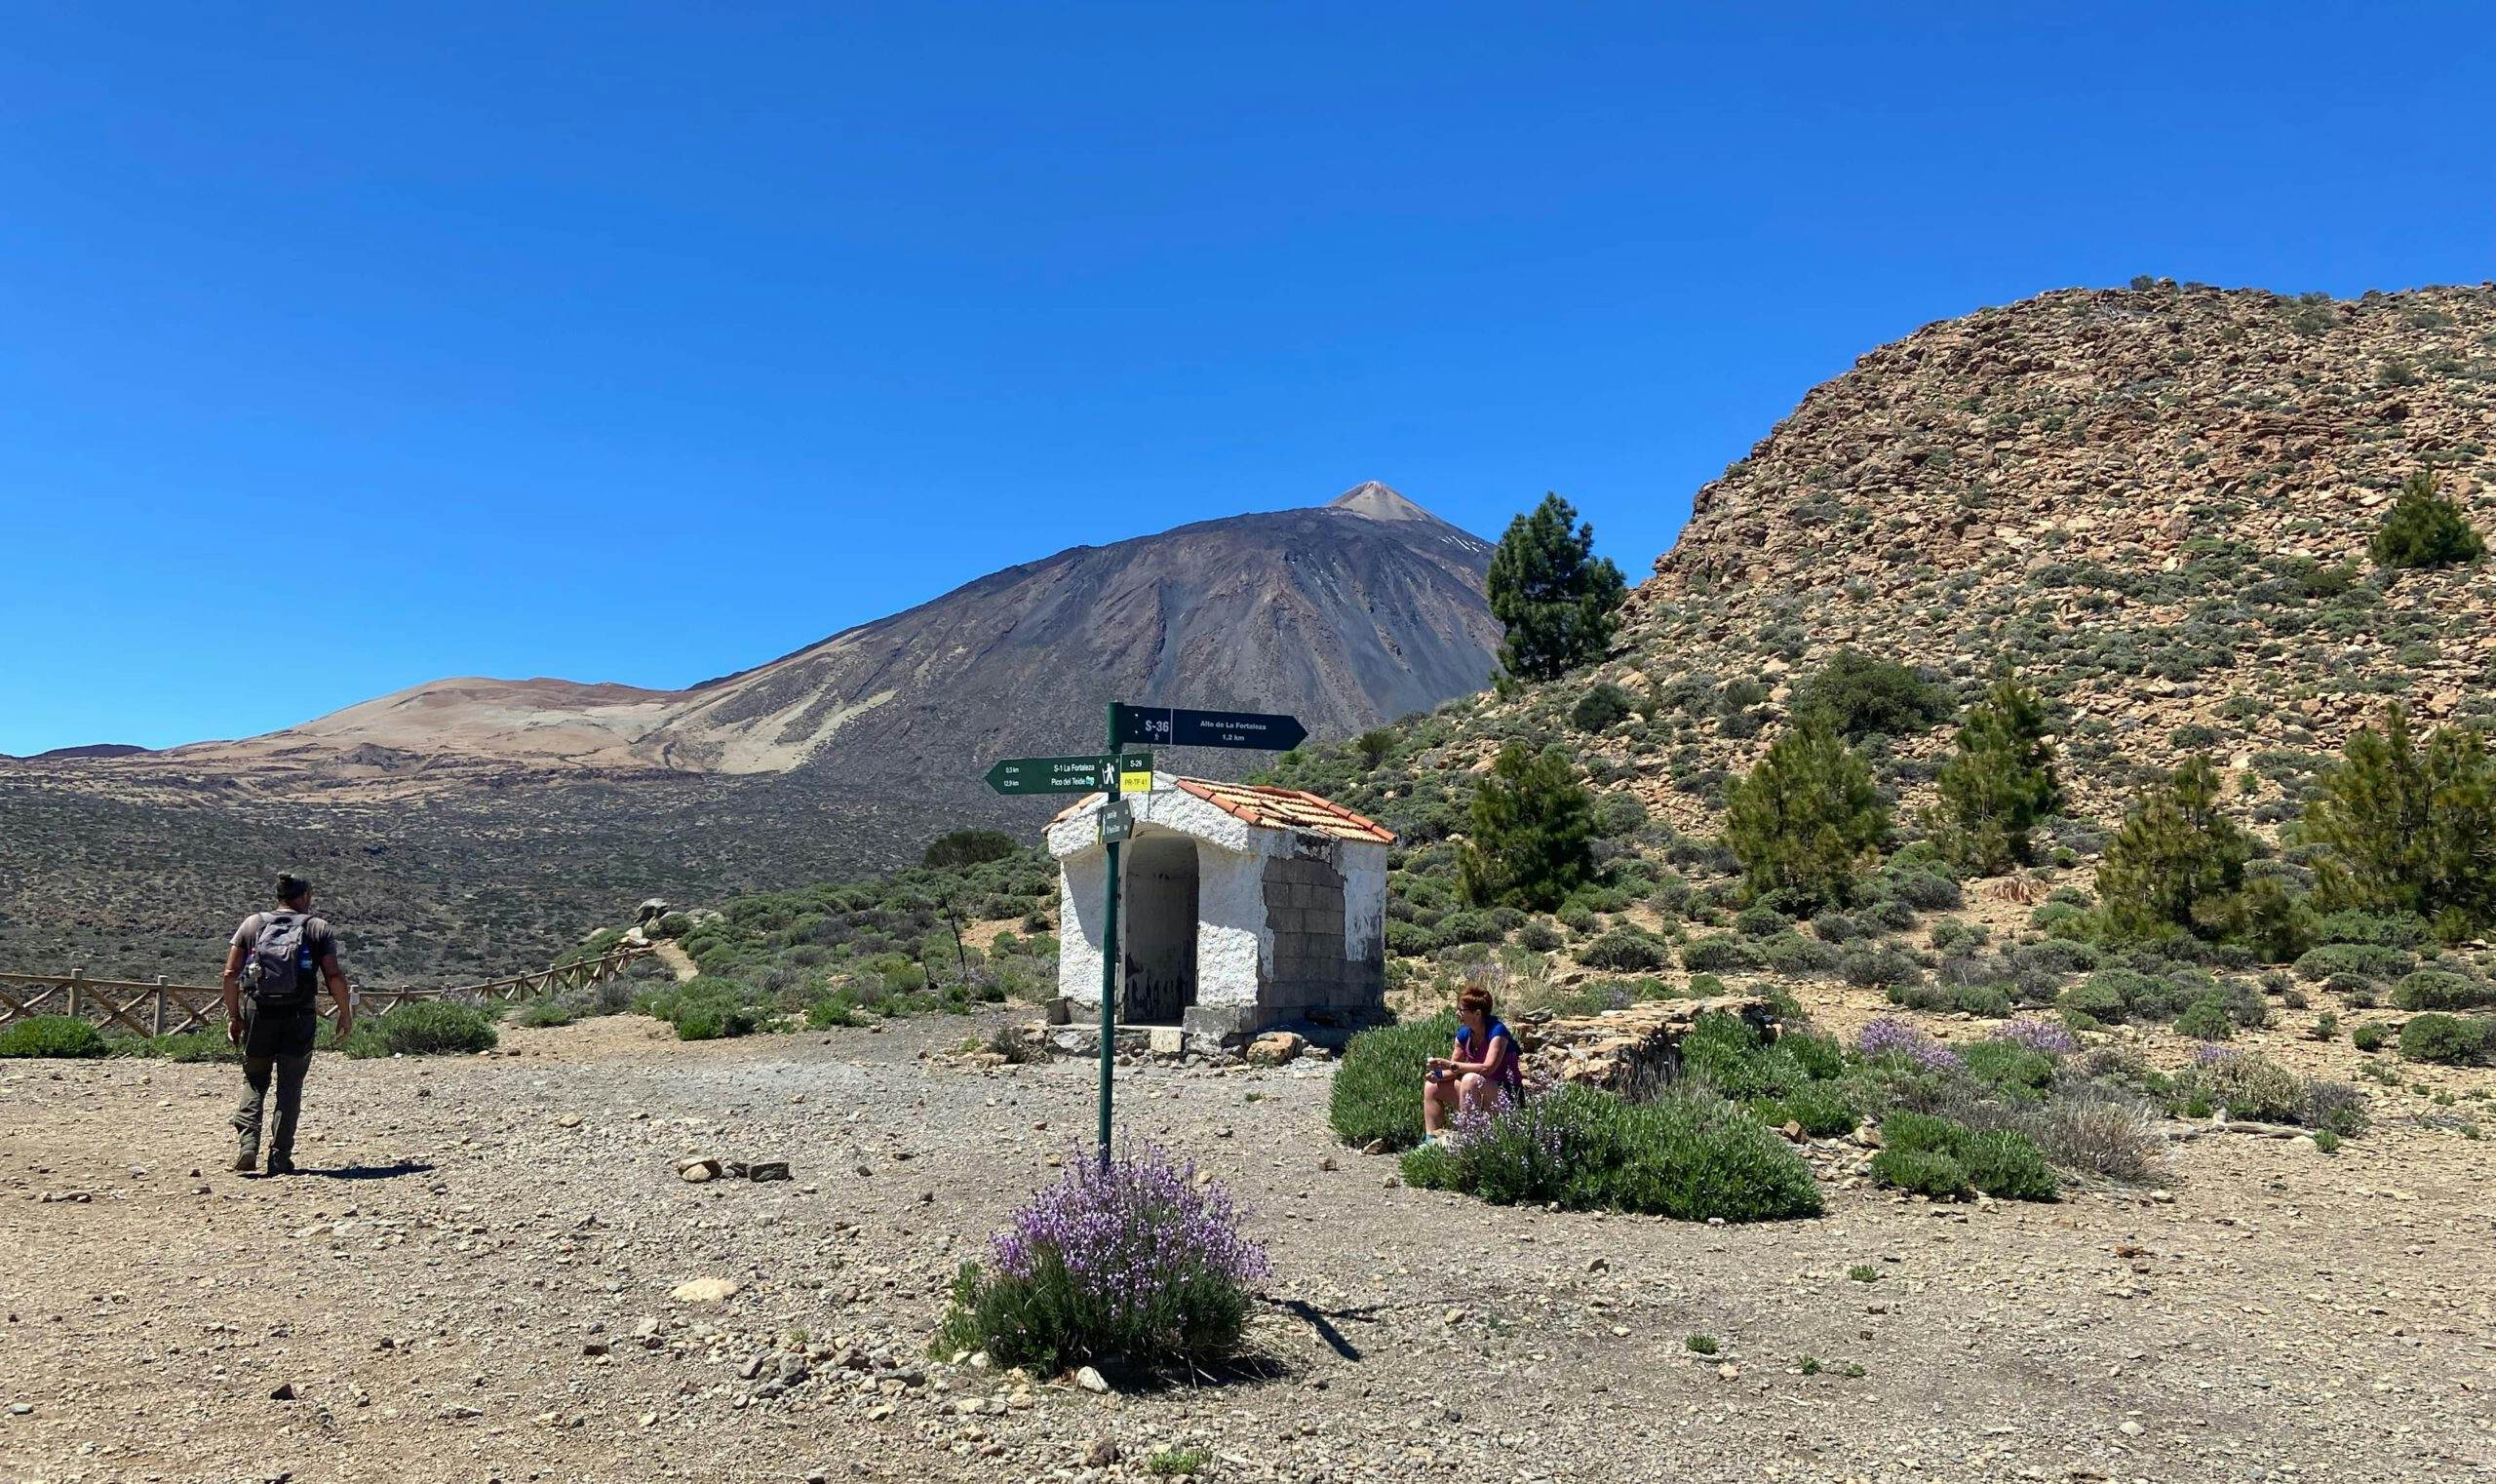 Small chapel below Fortaleza Cañadas with hiking junction - continue on Teide or climb Fortaleza